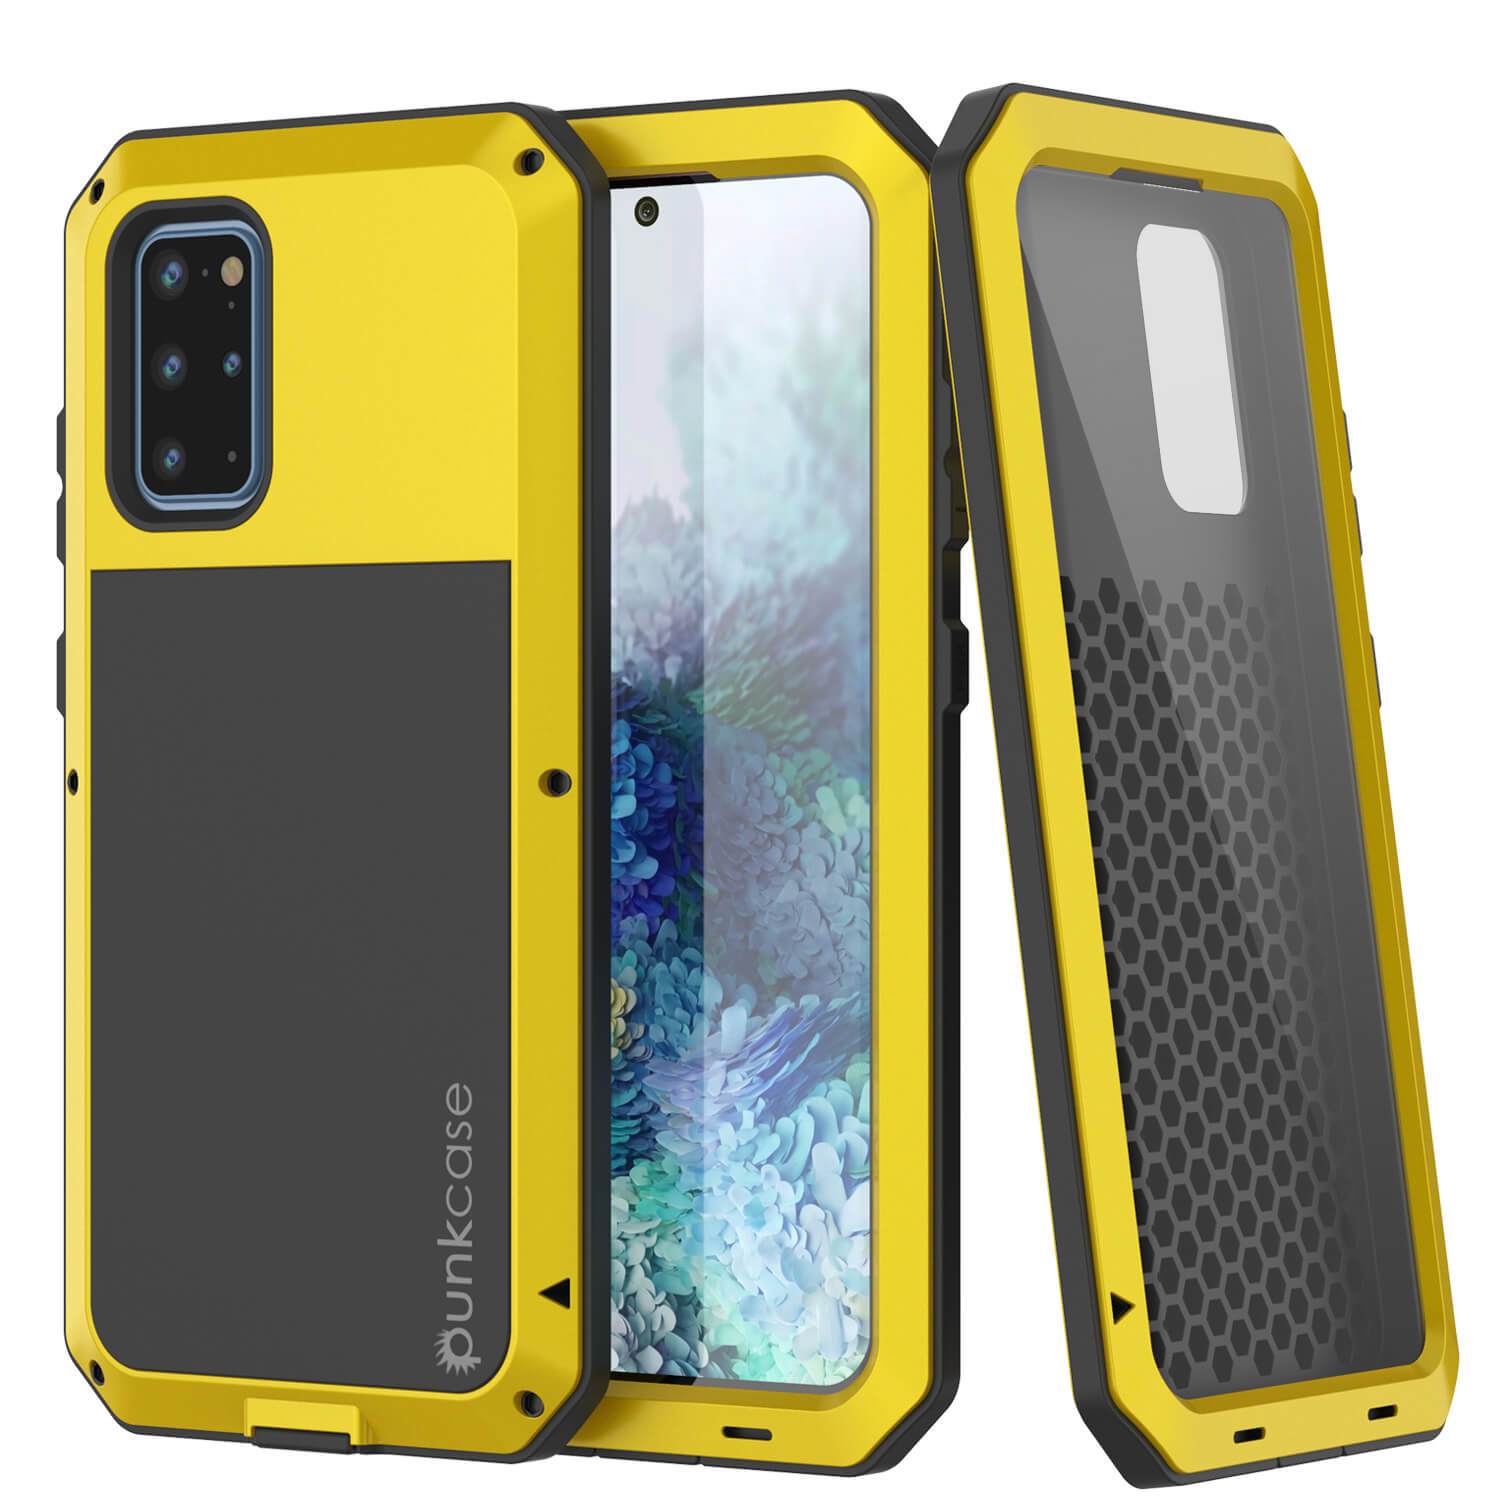 Galaxy s20+ Plus Metal Case, Heavy Duty Military Grade Rugged Armor Cover [Neon]